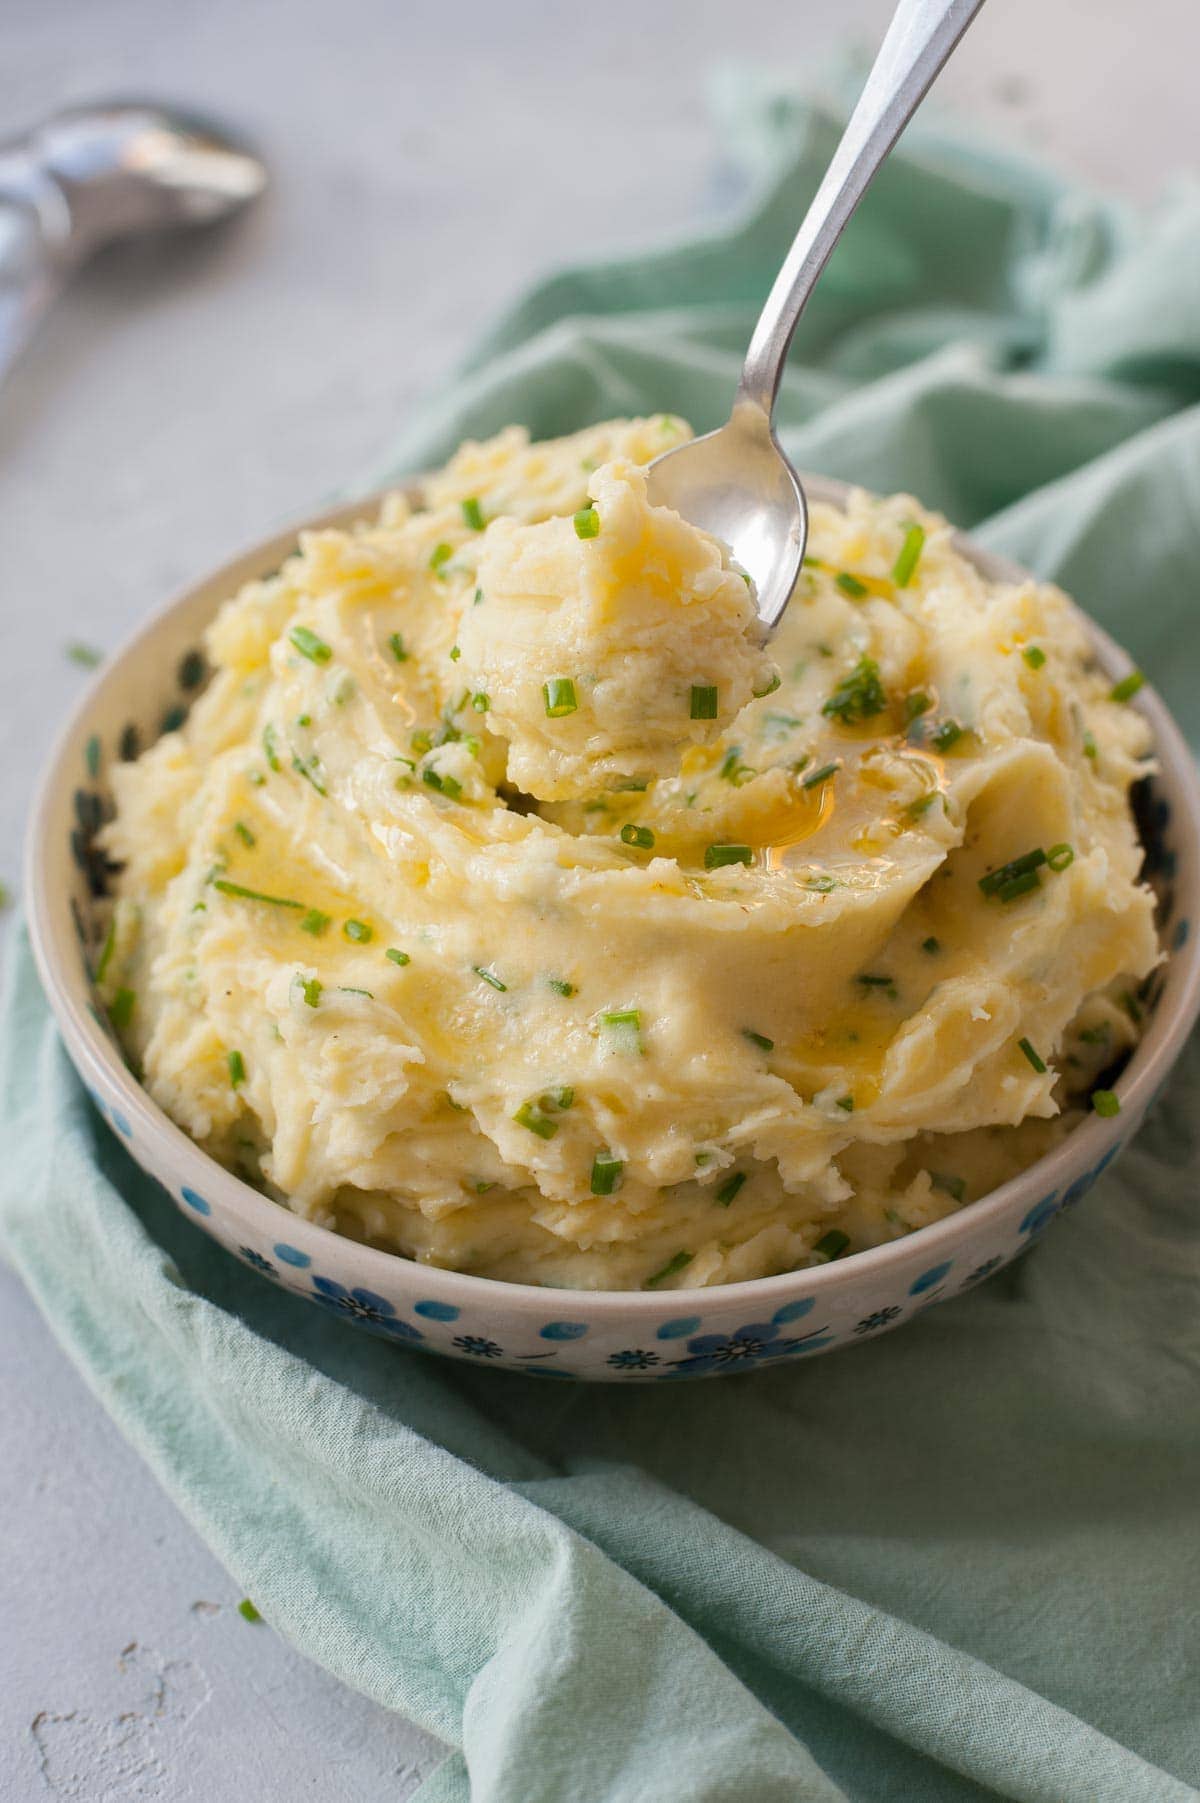 Sour cream mashed potatoes with chives in a blue bowl. Green kitchen cloth underneath.